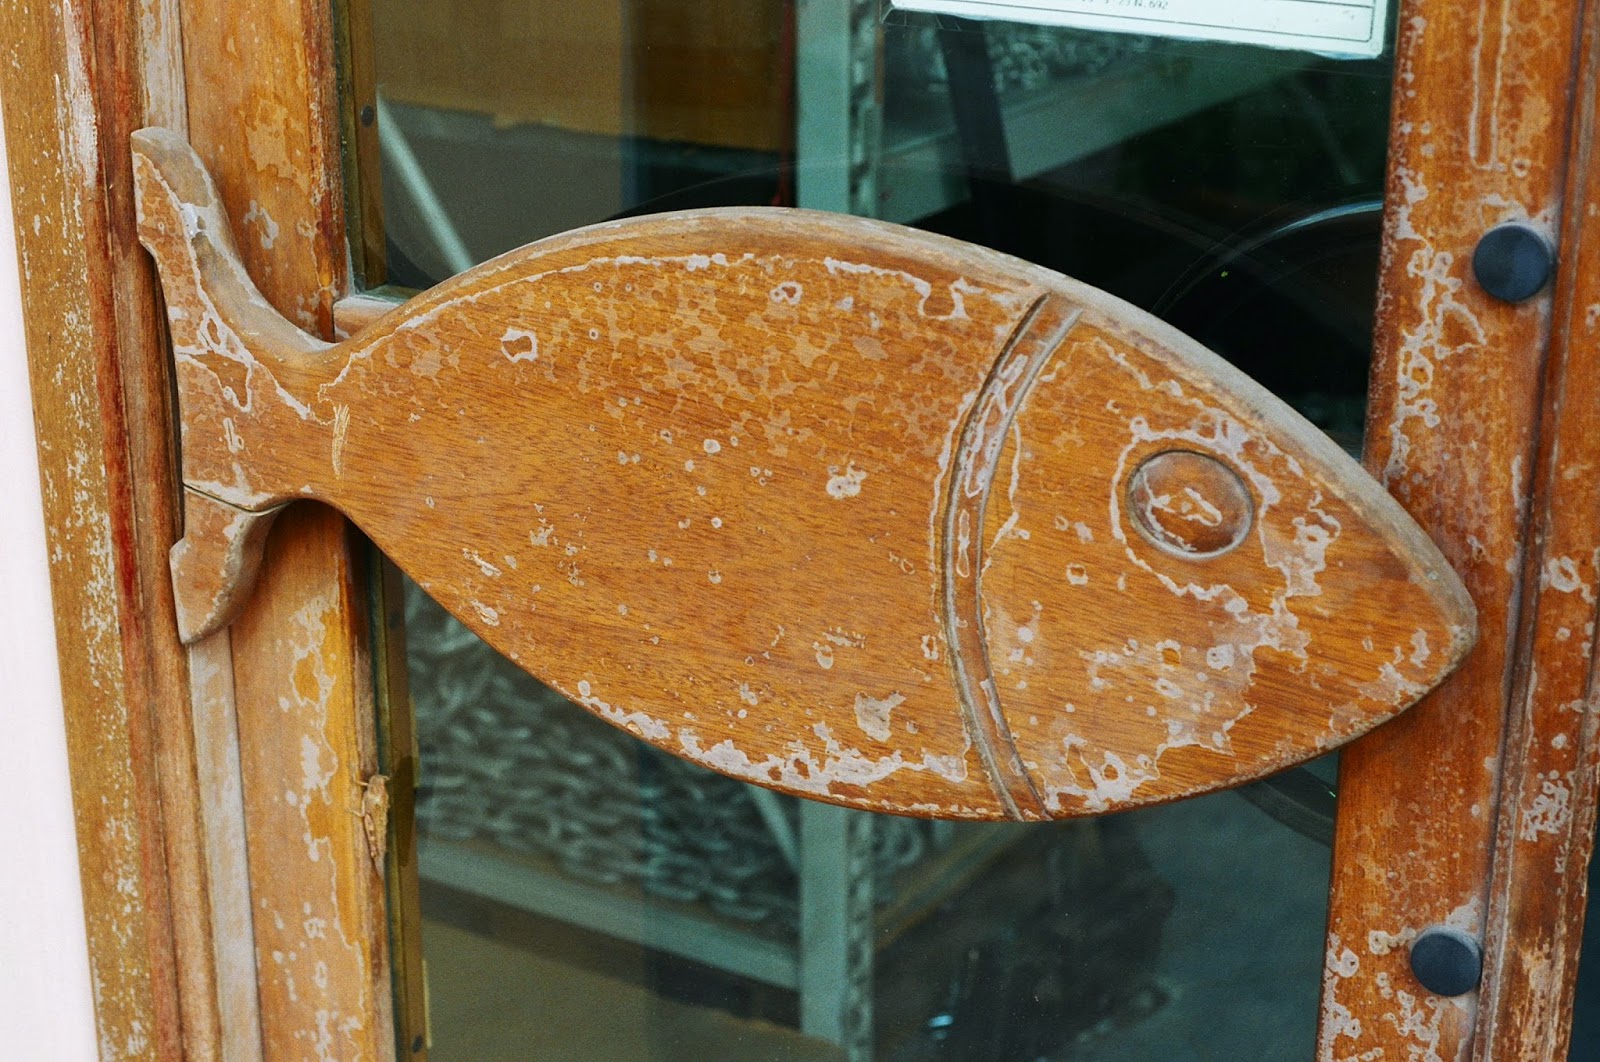 SHIPS CHANDLERS, PORT, FISH, FISH DOOR HANDLE, ARTISAN WOODWORK, CRICKET, GRILLO, CAMOUFLAGE, SCIACCA, SICILY, © VAC 100 DAYS 4 MILLION CONVERSATIONS, 2015 GENERAL ELECTION